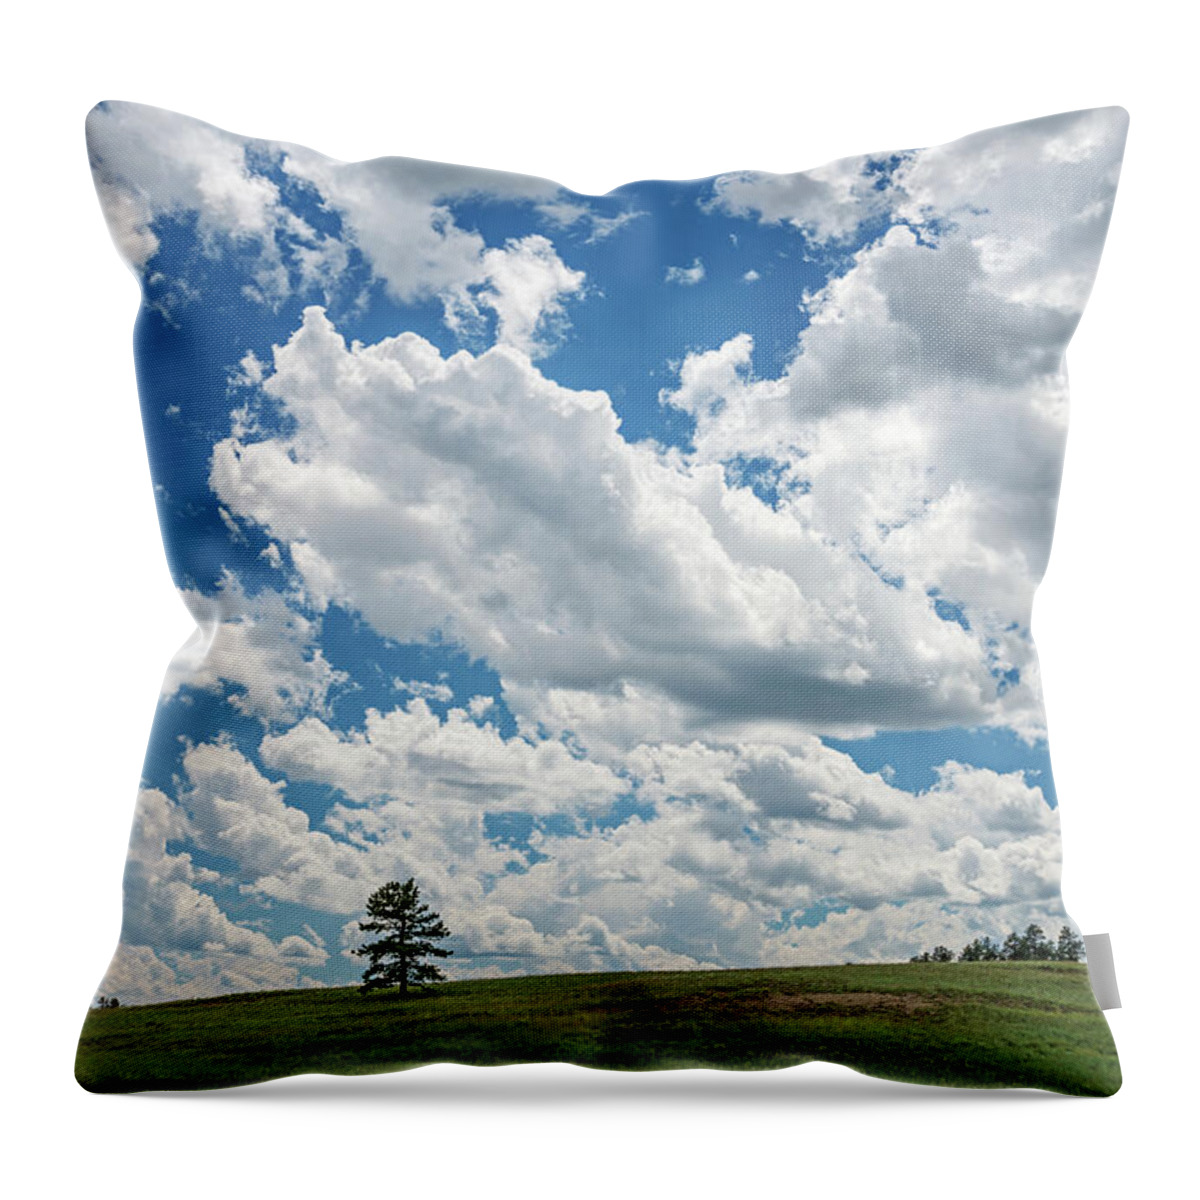 Teller County Throw Pillow featuring the photograph All The Livelong Day by Bijan Pirnia